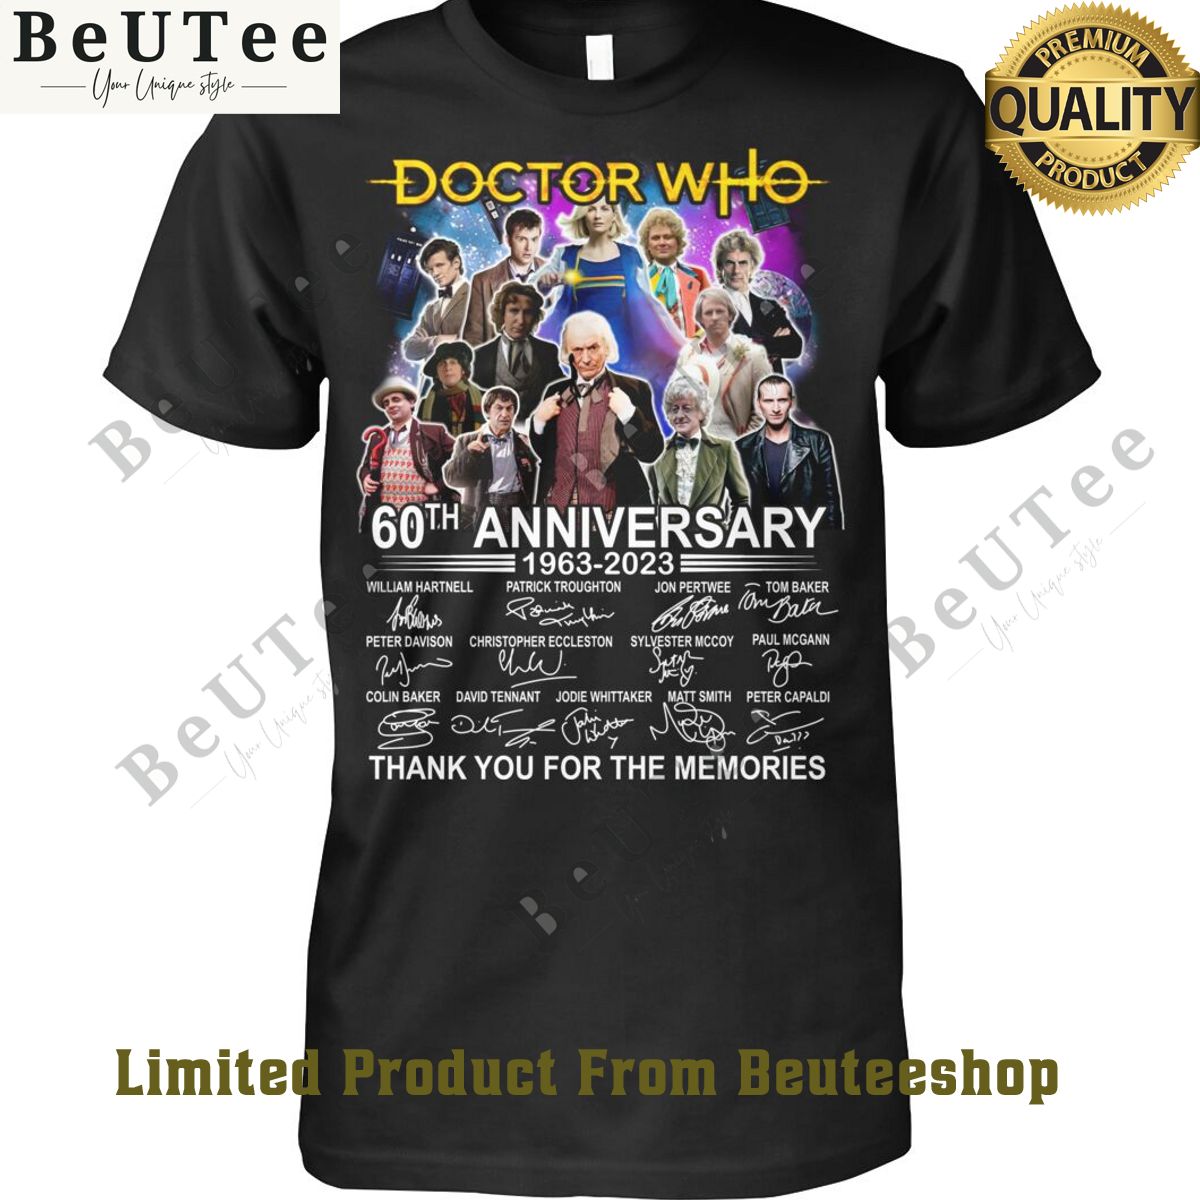 limited edition doctor who 60th anniversary 2d shirt 1 OLjLg.jpg